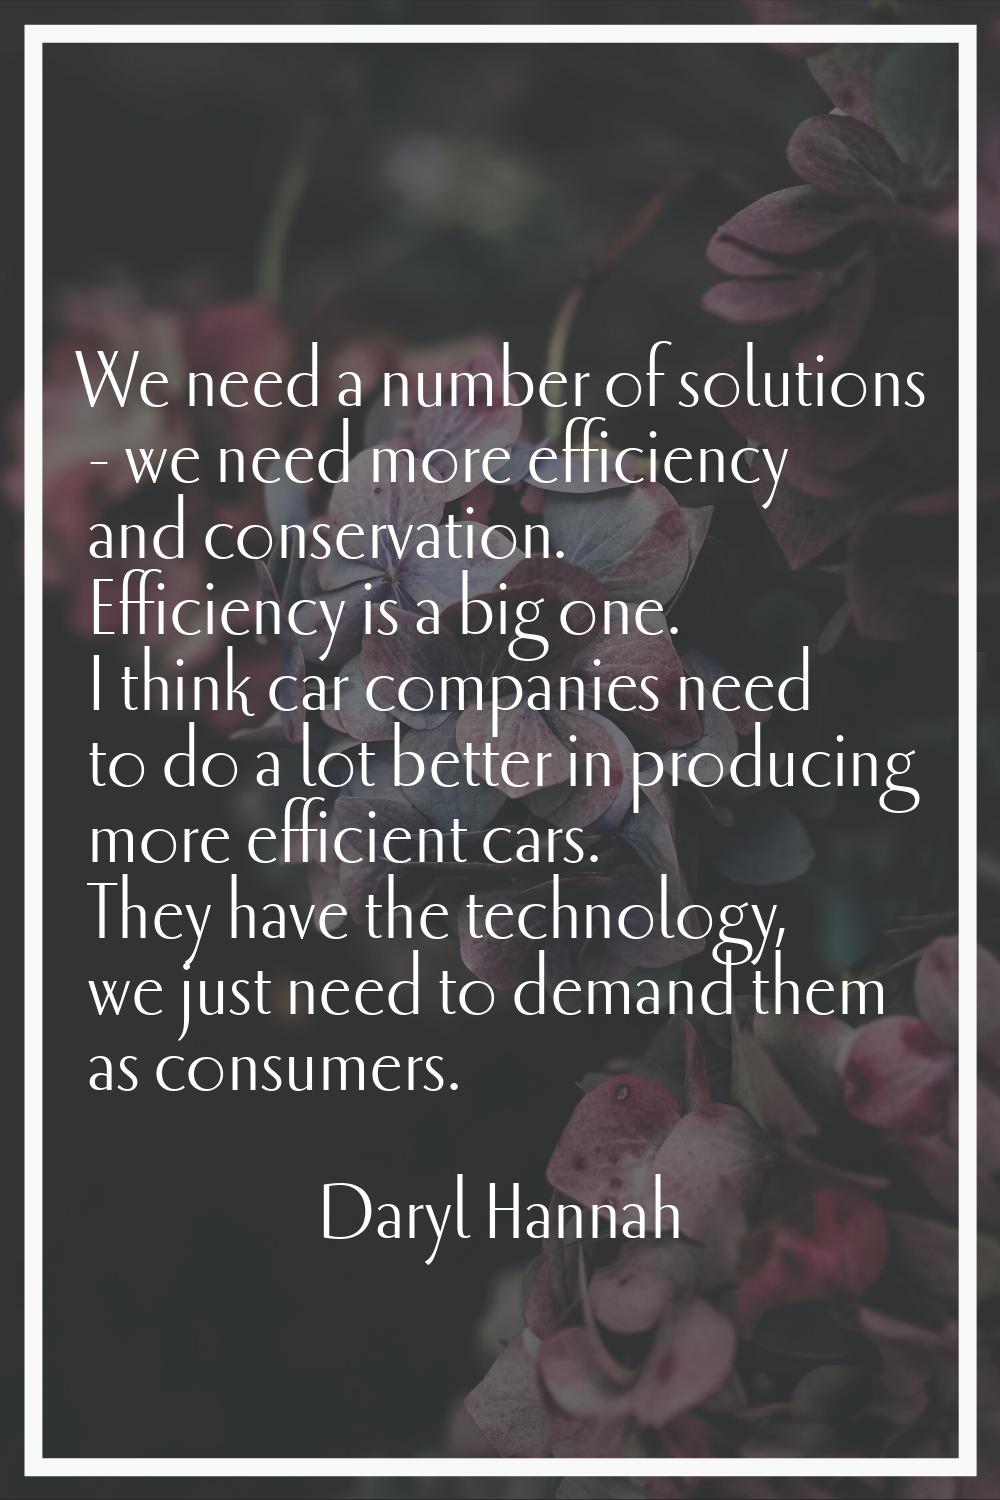 We need a number of solutions - we need more efficiency and conservation. Efficiency is a big one. 